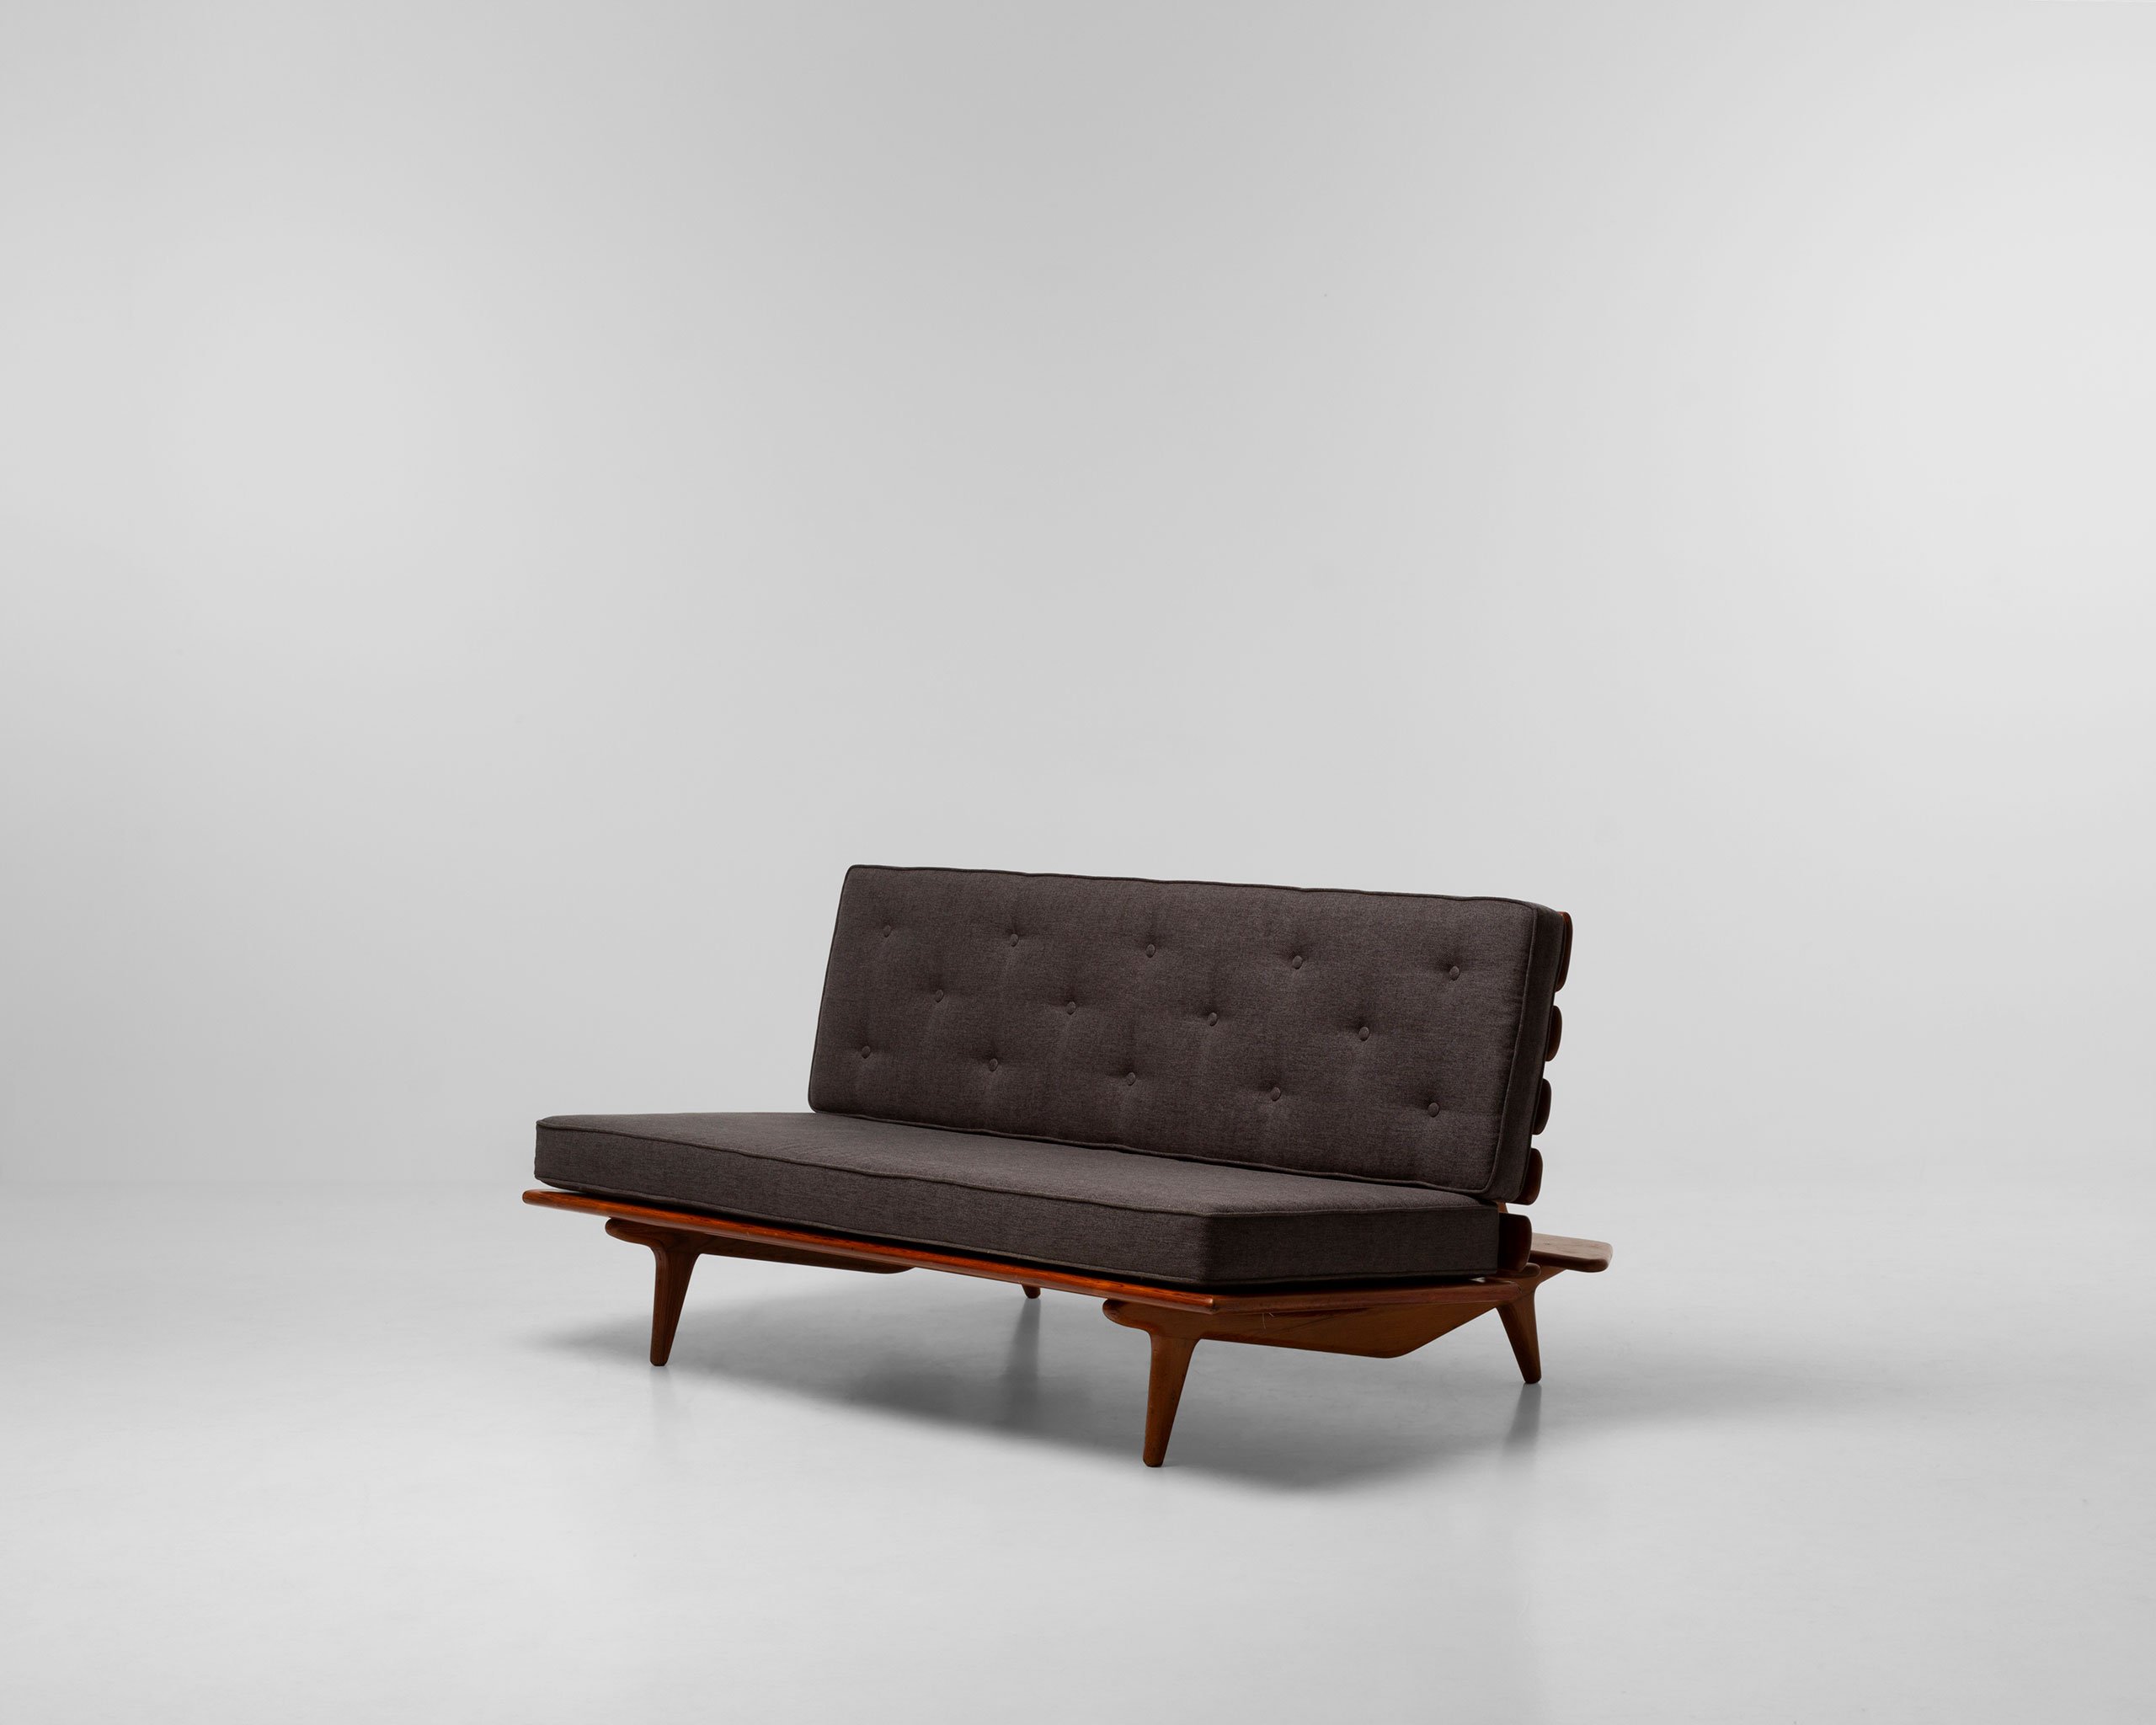 Hauner Sofa by Sergio Rodrigues. Photography © Carpenters Workshop Gallery.